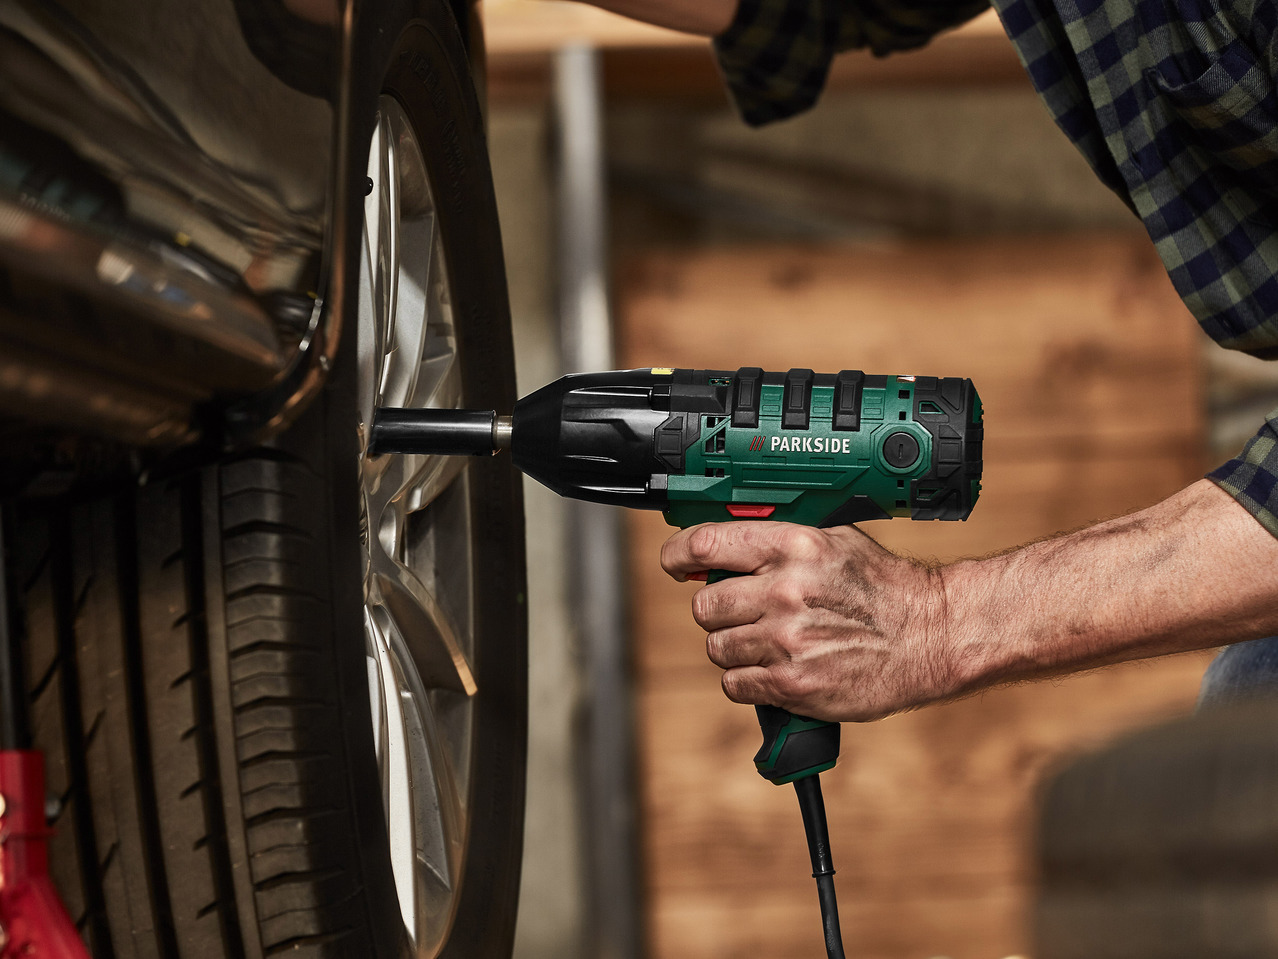 450W ELECTRIC IMPACT WRENCH